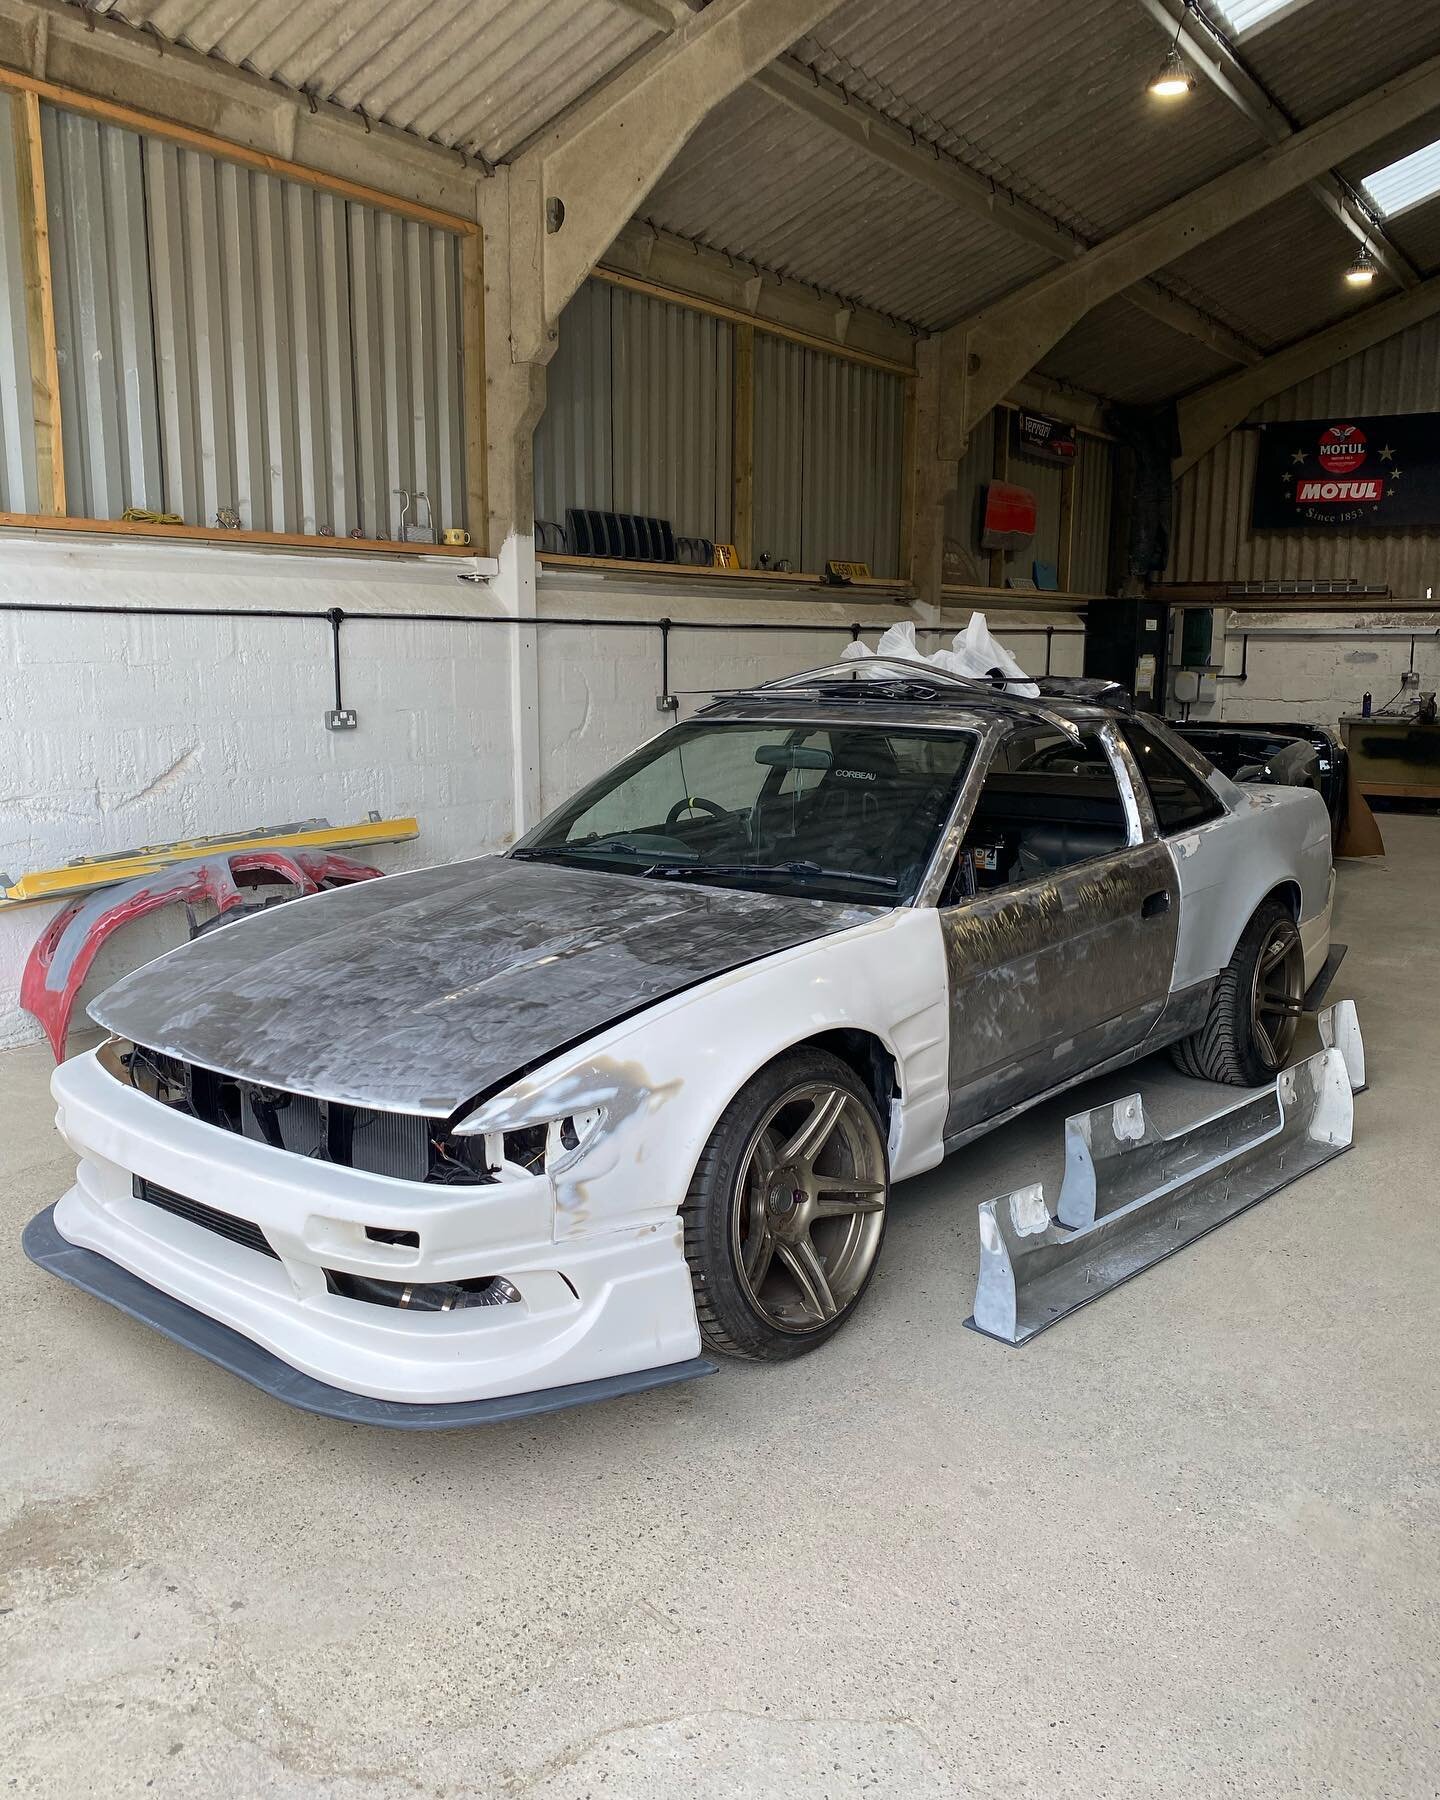 One of our latest arrivals&hellip;

My cuppa tea this #nissanps13

Proper show car, air ride, fancy wheels, wild body kit&hellip; the list goes on! 

We&rsquo;ve got the pleasure of taking care of a bare metal respray on this beauty, very exited, lot